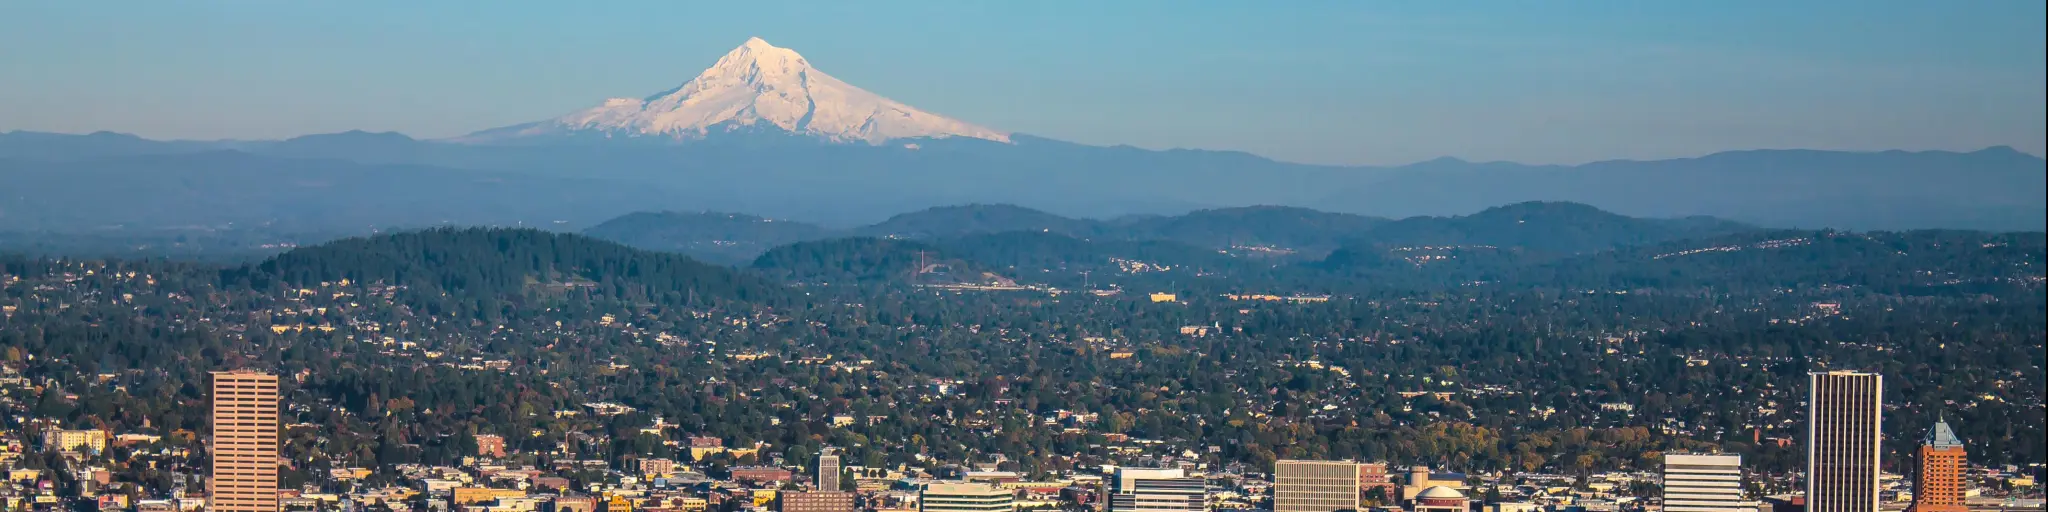 Cityscape of Portland, Oregon and Mount Hood towering in distance, autumn afternoon.